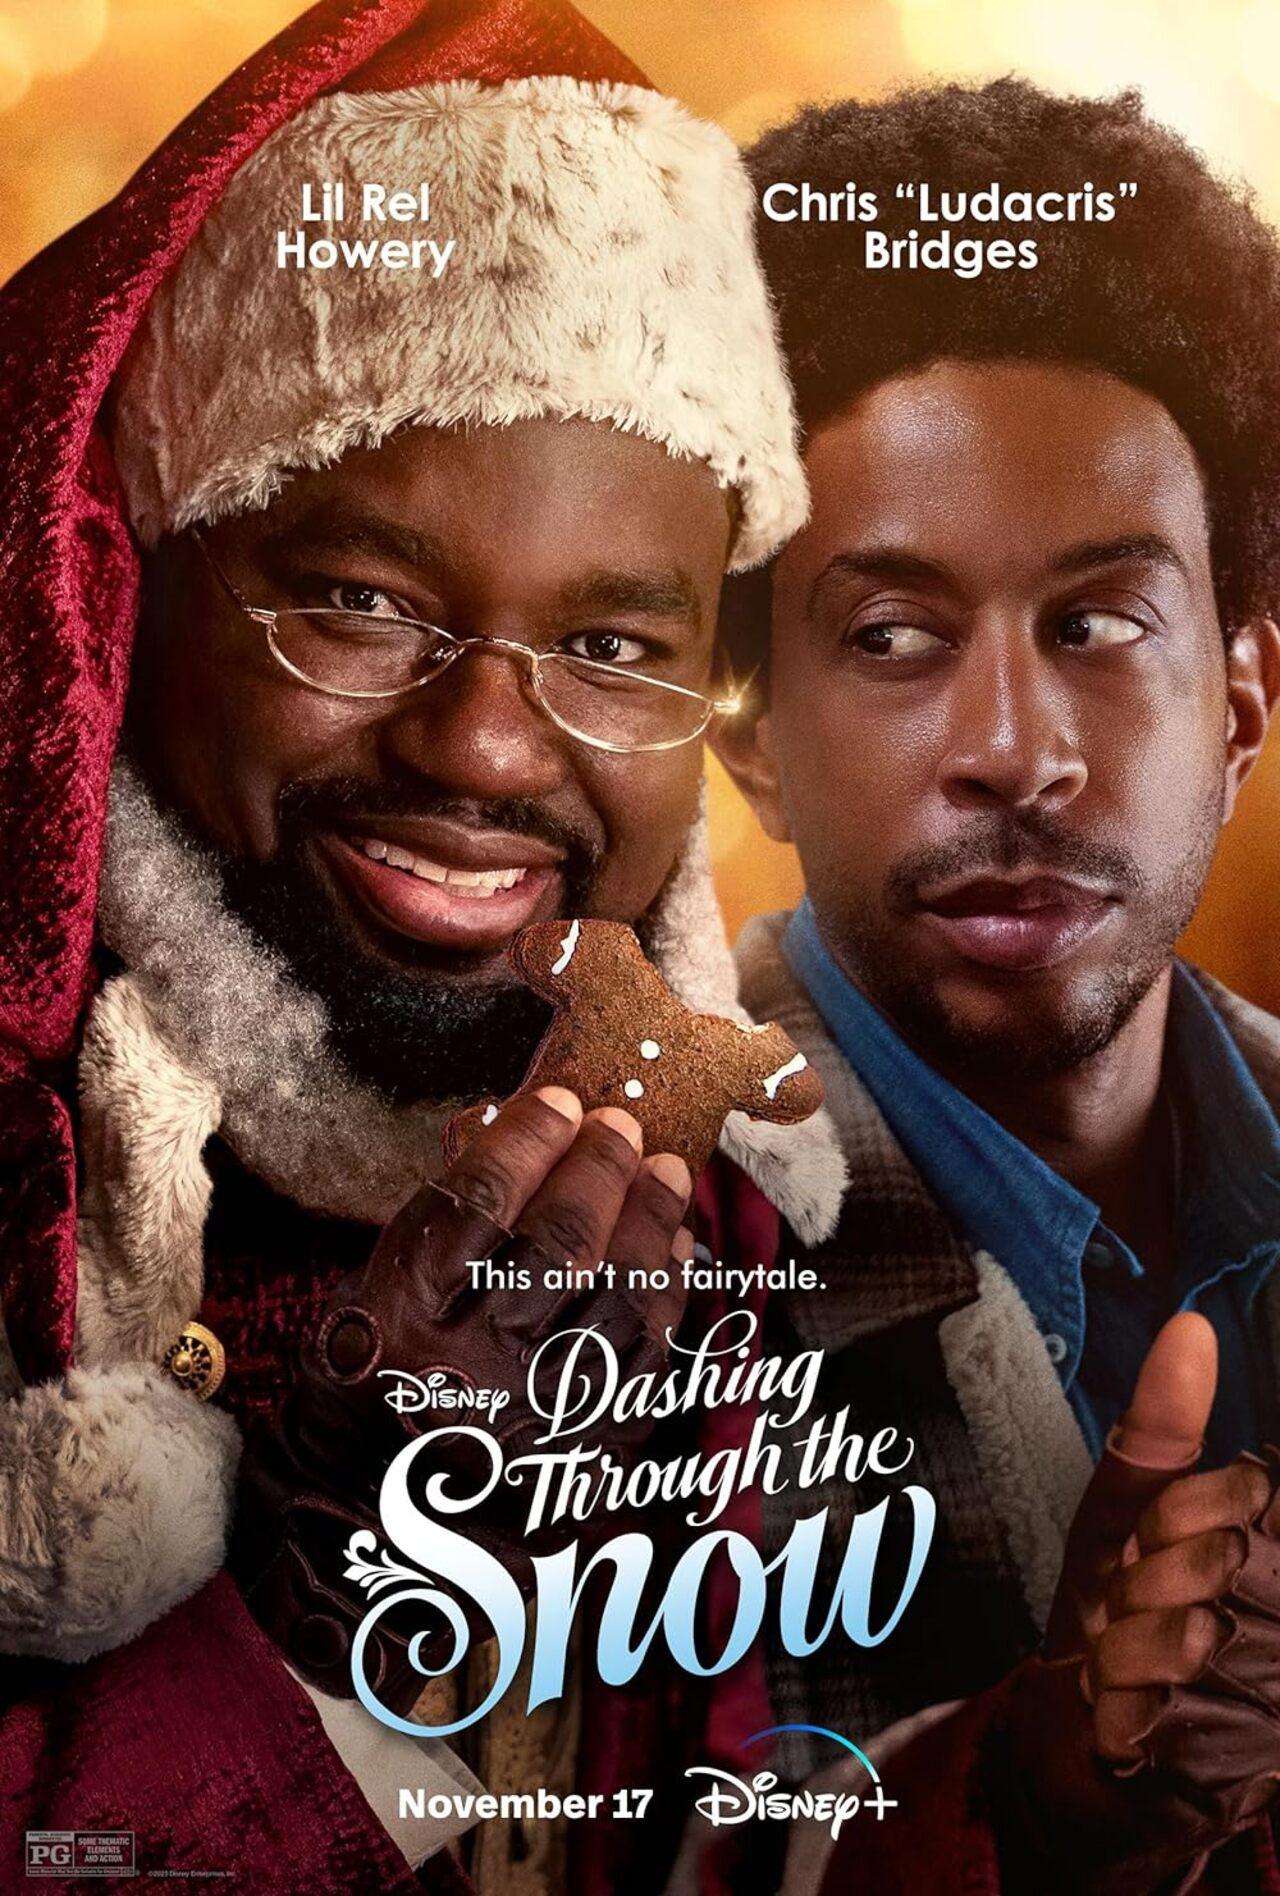 Dashing Through the Snow is a Christmas fantasy film which released on Disney+ on November 17, 2023. It is about a social worker and his daughter who meet a man dressed as Santa Claus